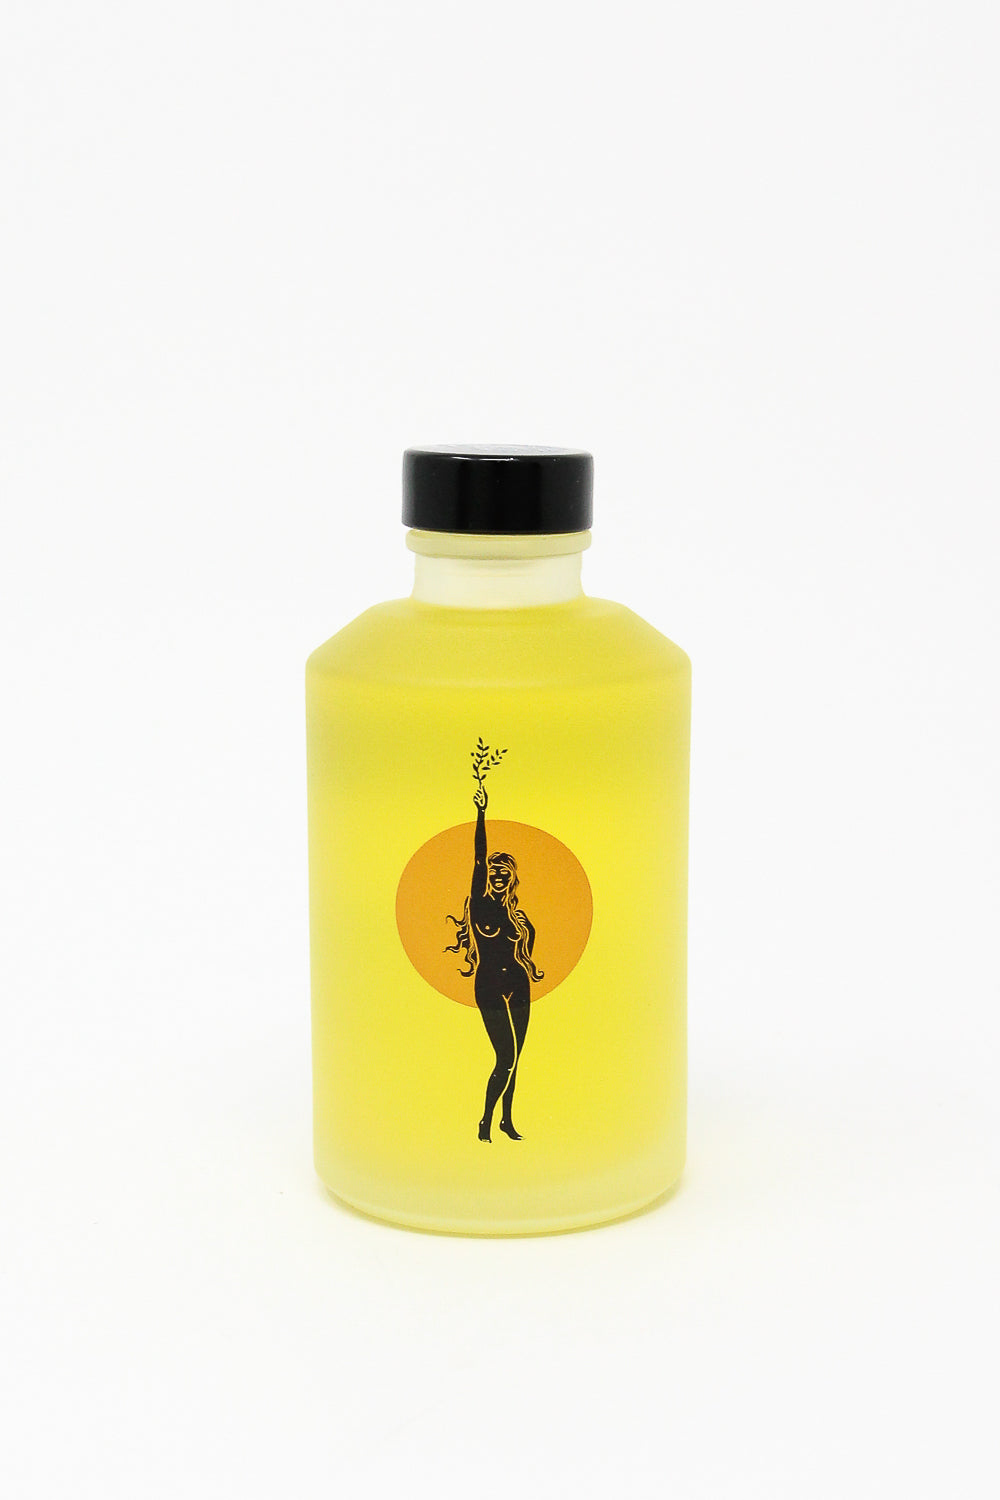 A Wonder Valley yellow bottle with a silhouette of a woman on it, containing Hinoki Body Oil for hydration and skin-softening.